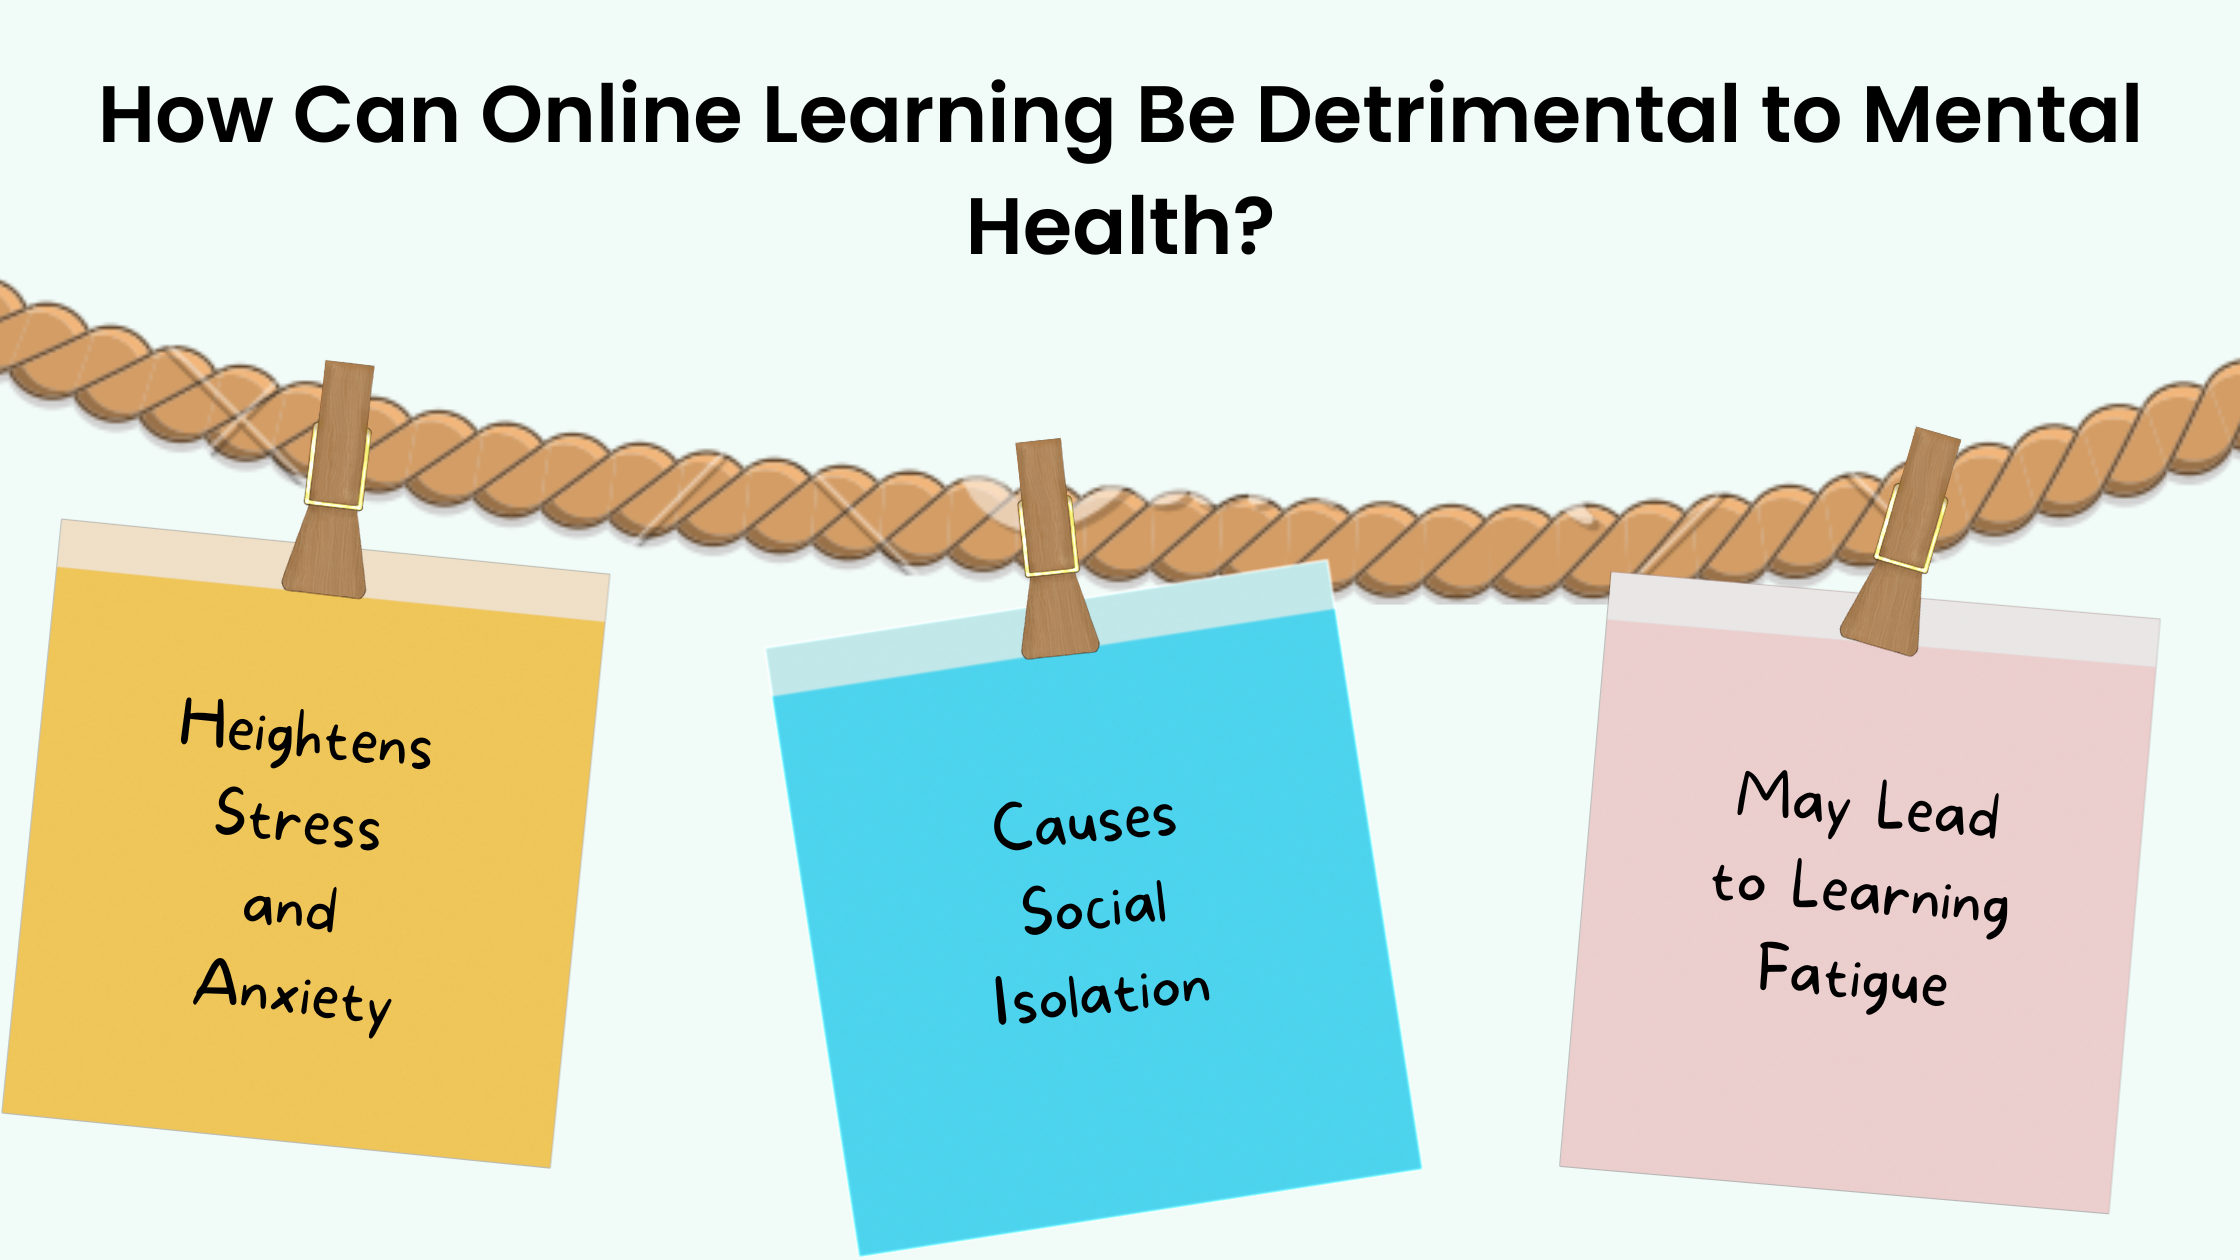 How Can Online Learning Be Detrimental to Mental Health